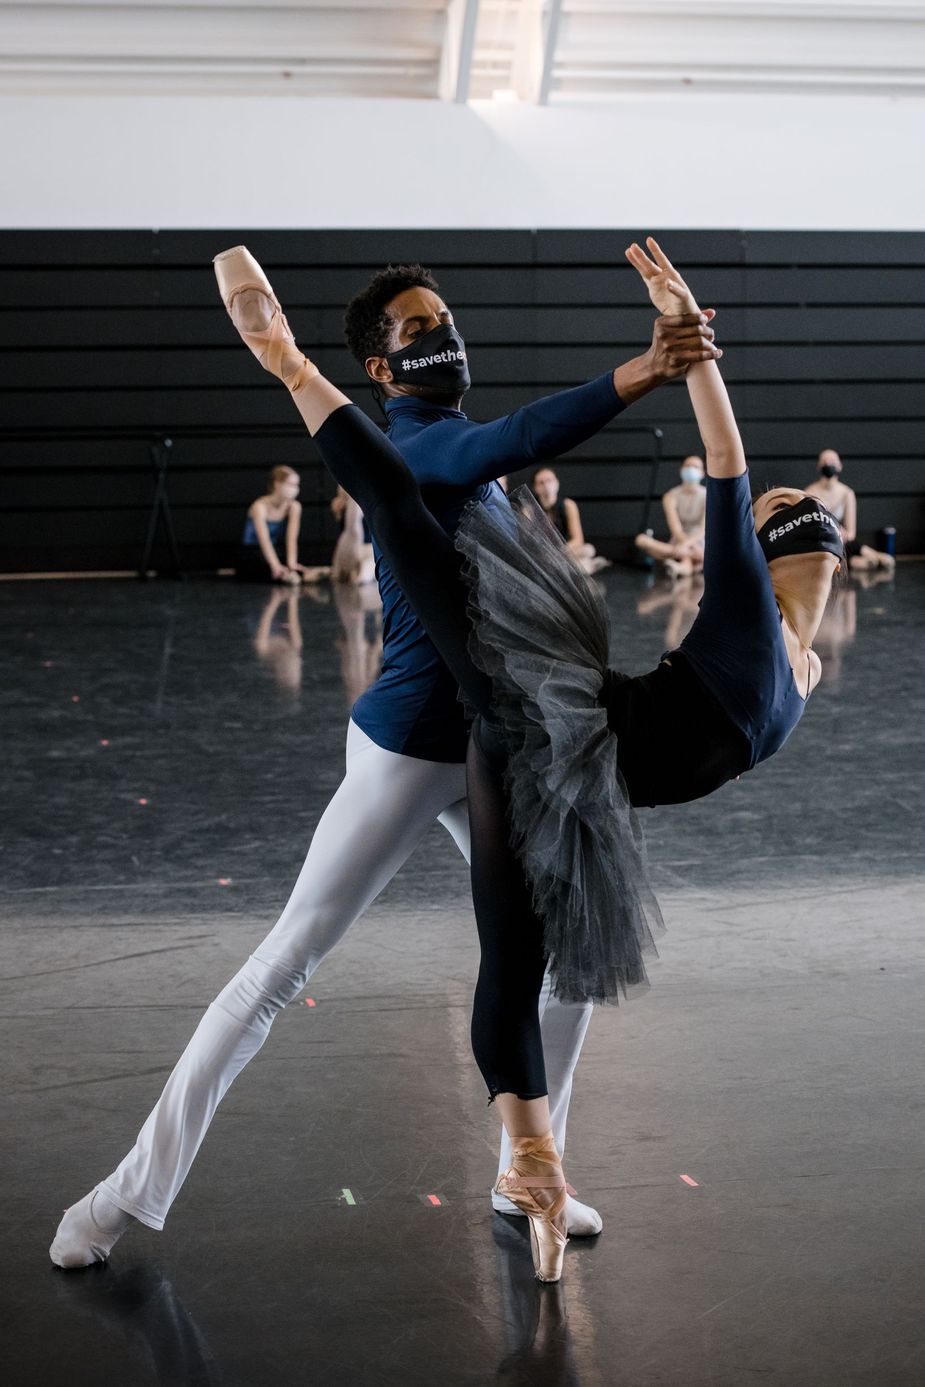 Studio rehearsals for "The Firebird" Photo by Kate Luber